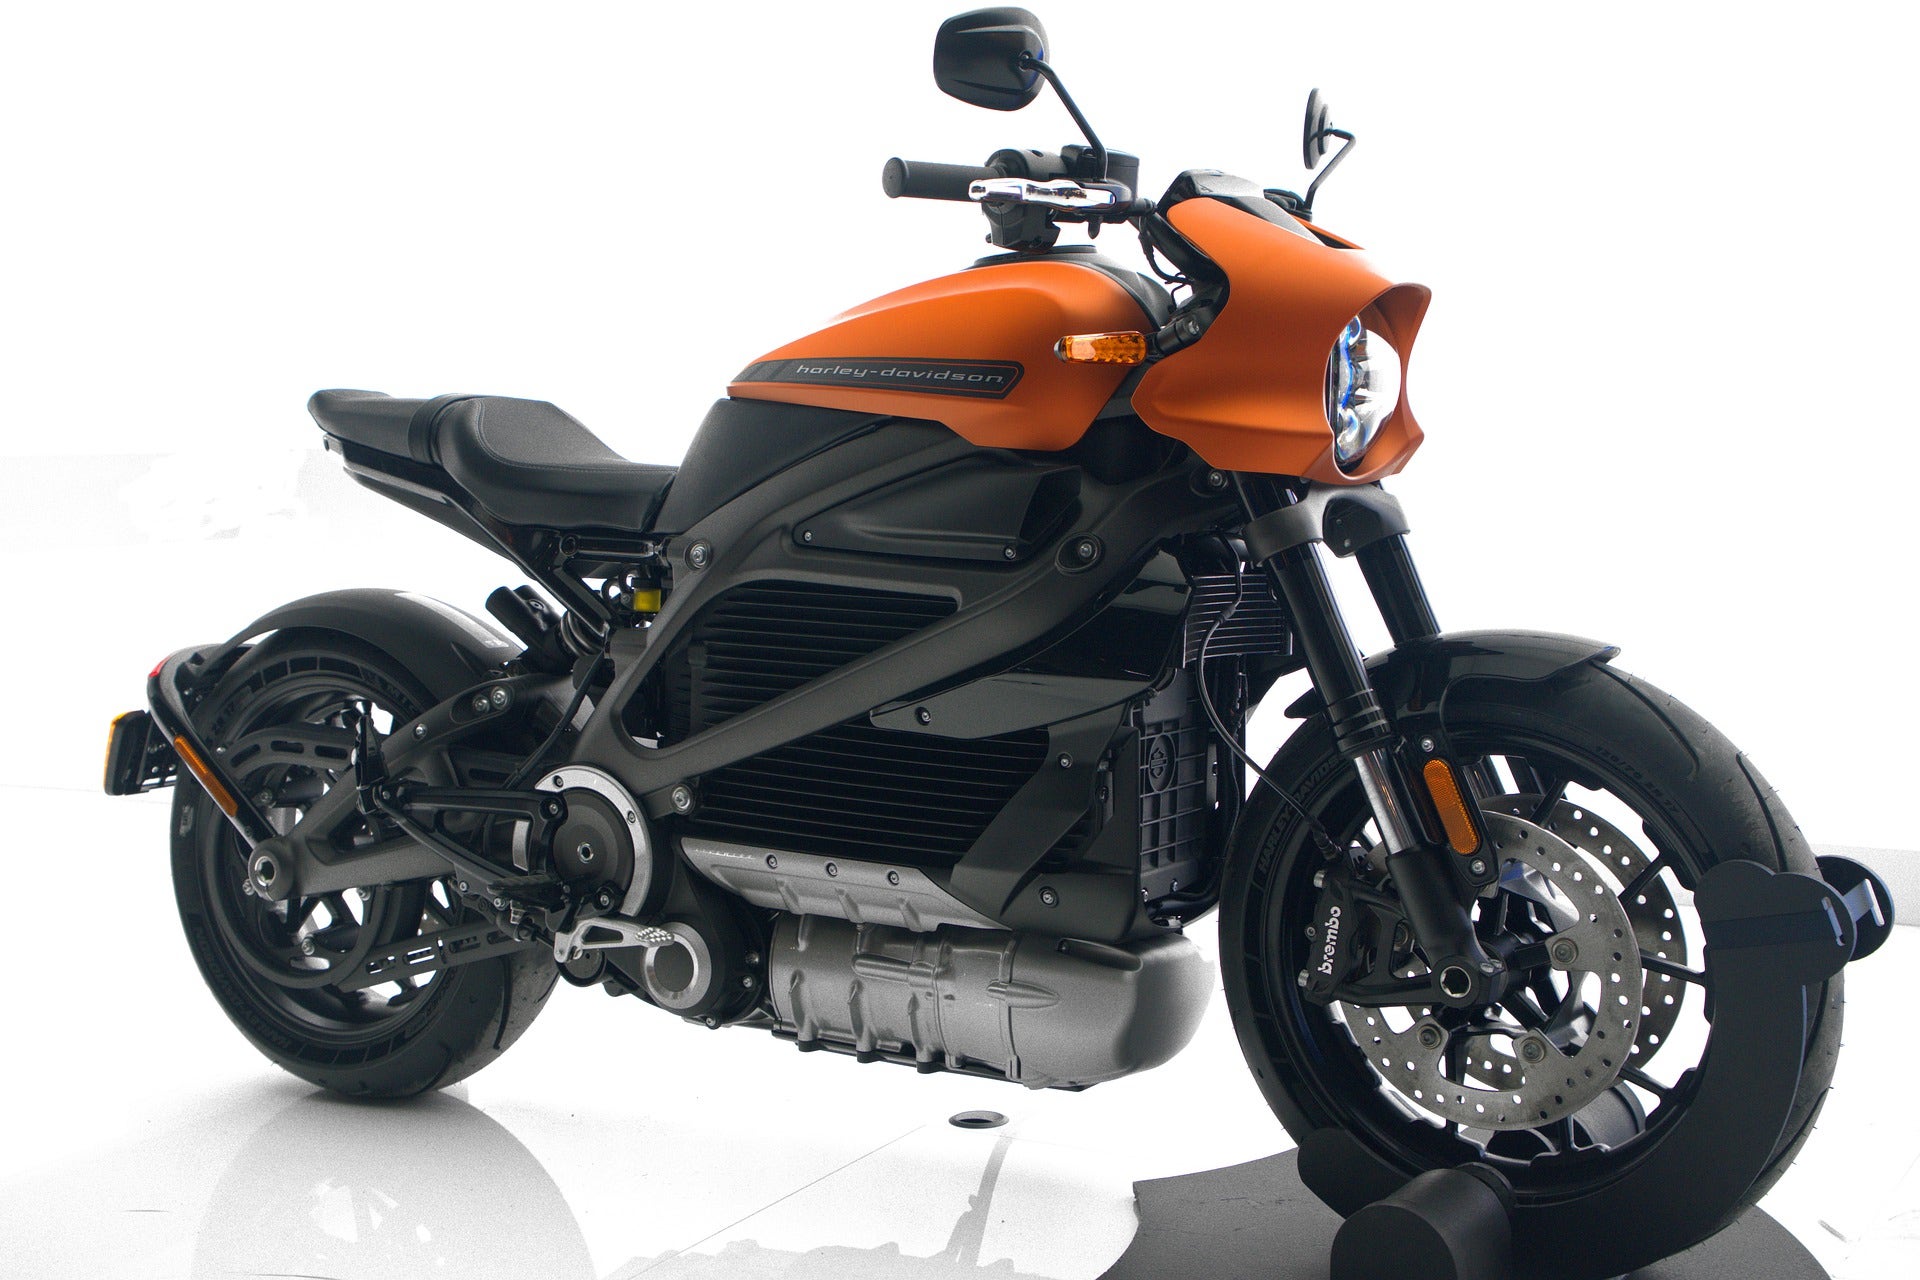 Harley-Davidson Creates Brand For LiveWire Electric Motorcycle